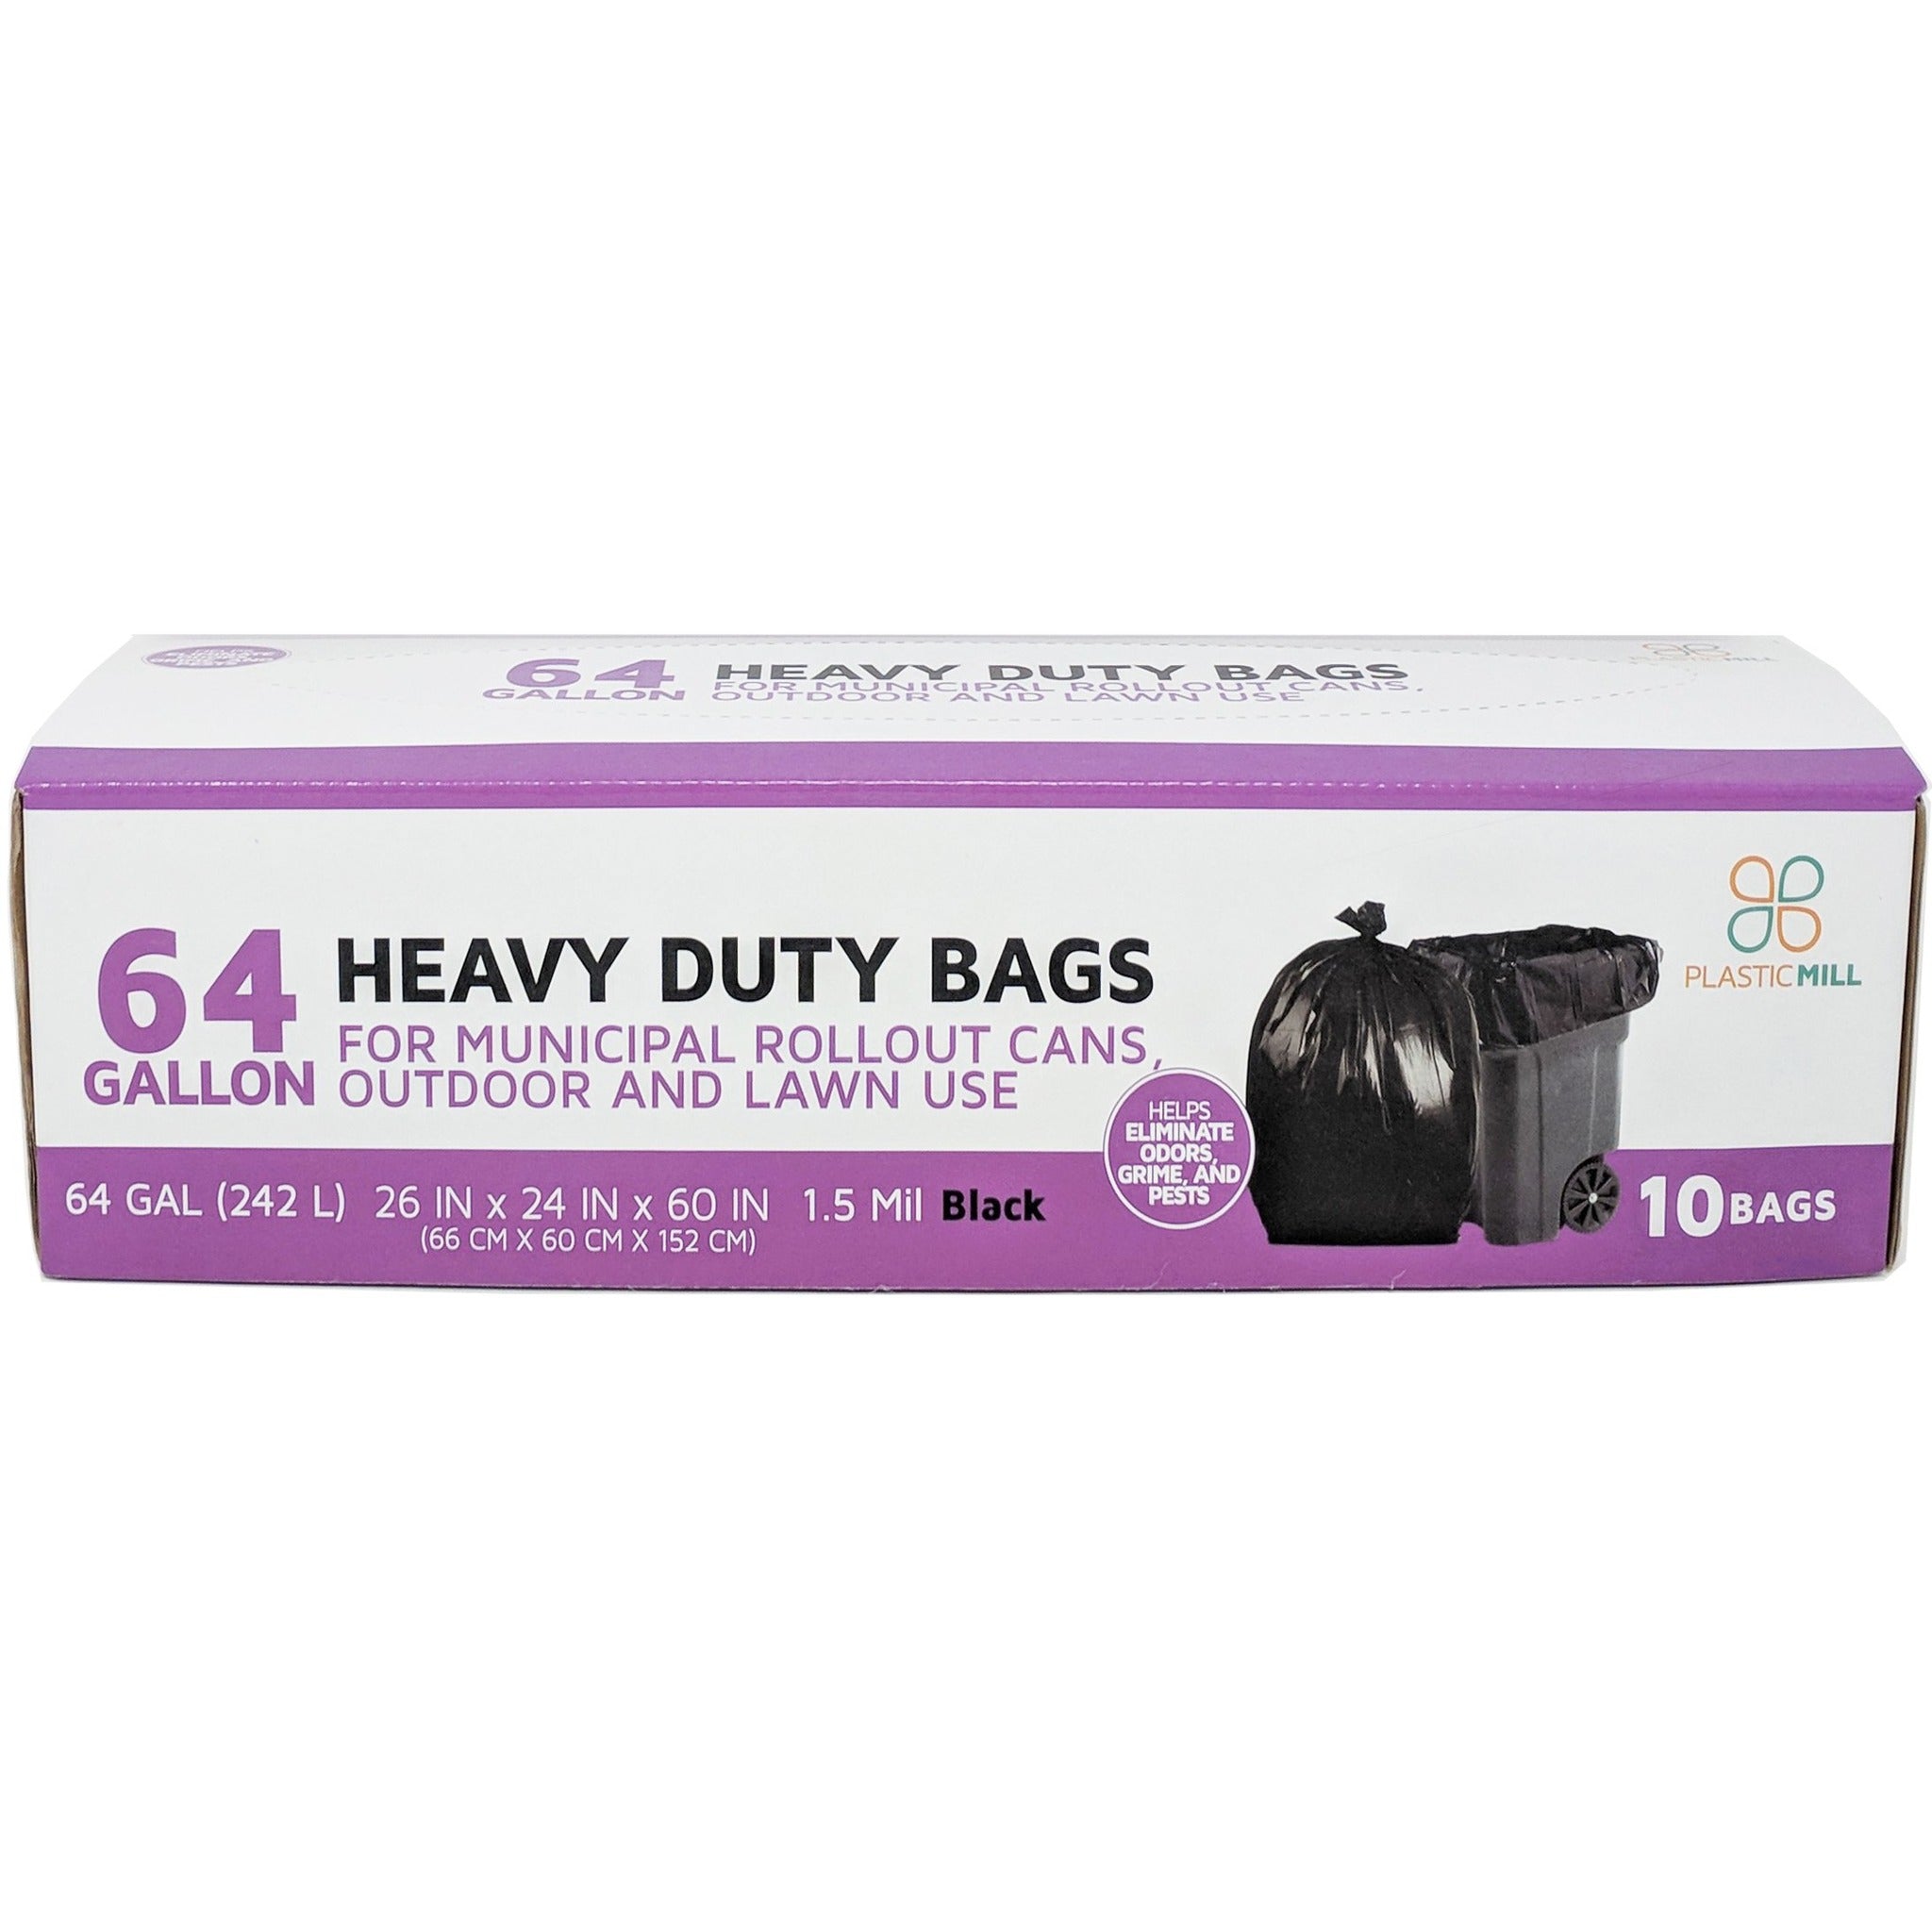 PlasticMill Trash Bags Cinch Black, 6 Pack, to Hold Garbage Bags in Place.